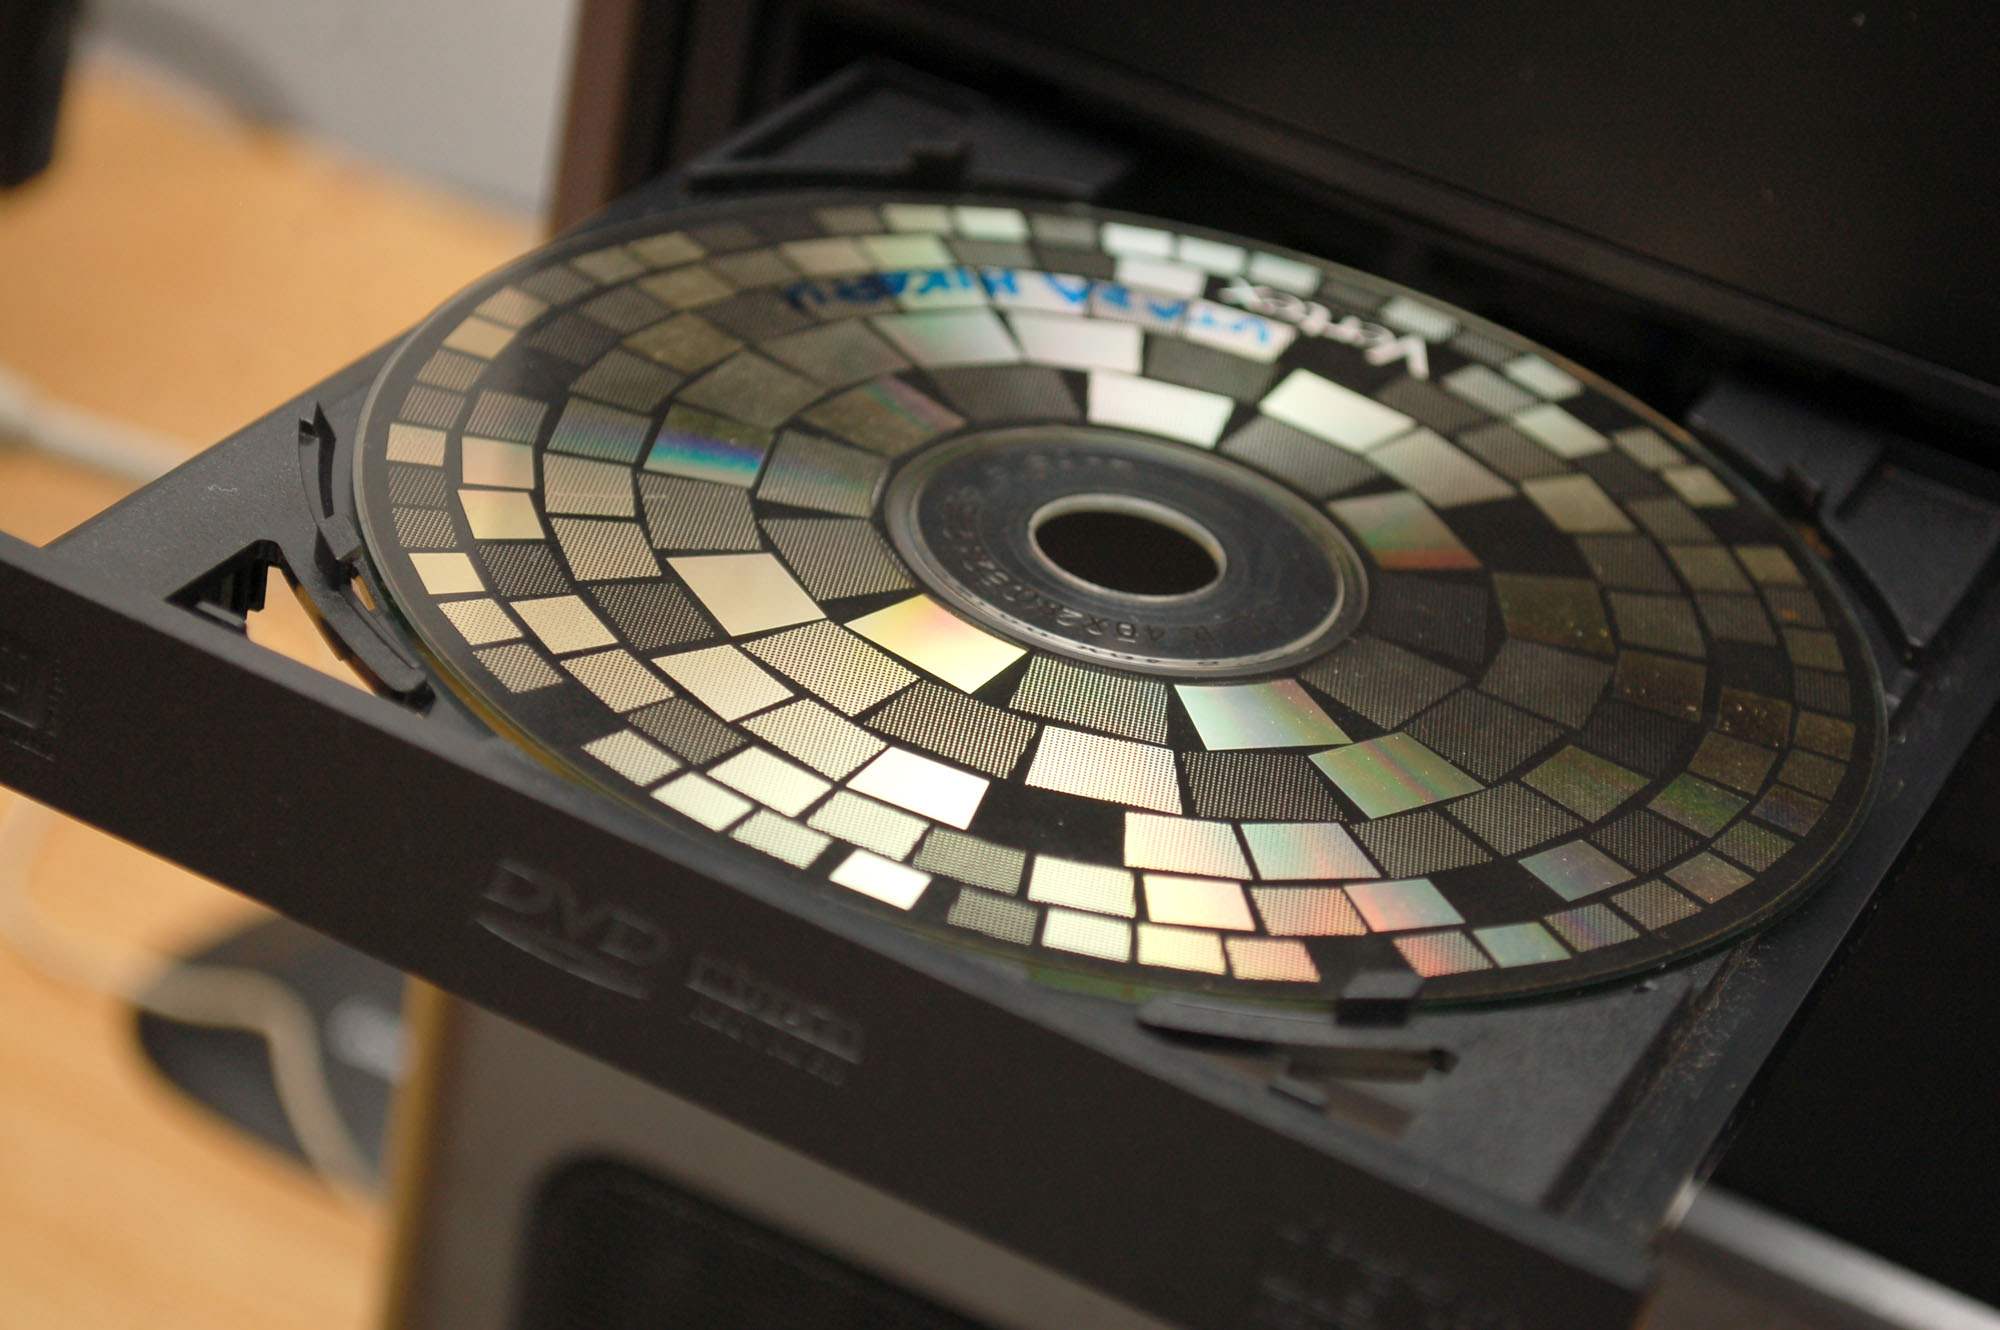 How to Make a Perfect Mix Tape or CD: 9 Steps (with Pictures)